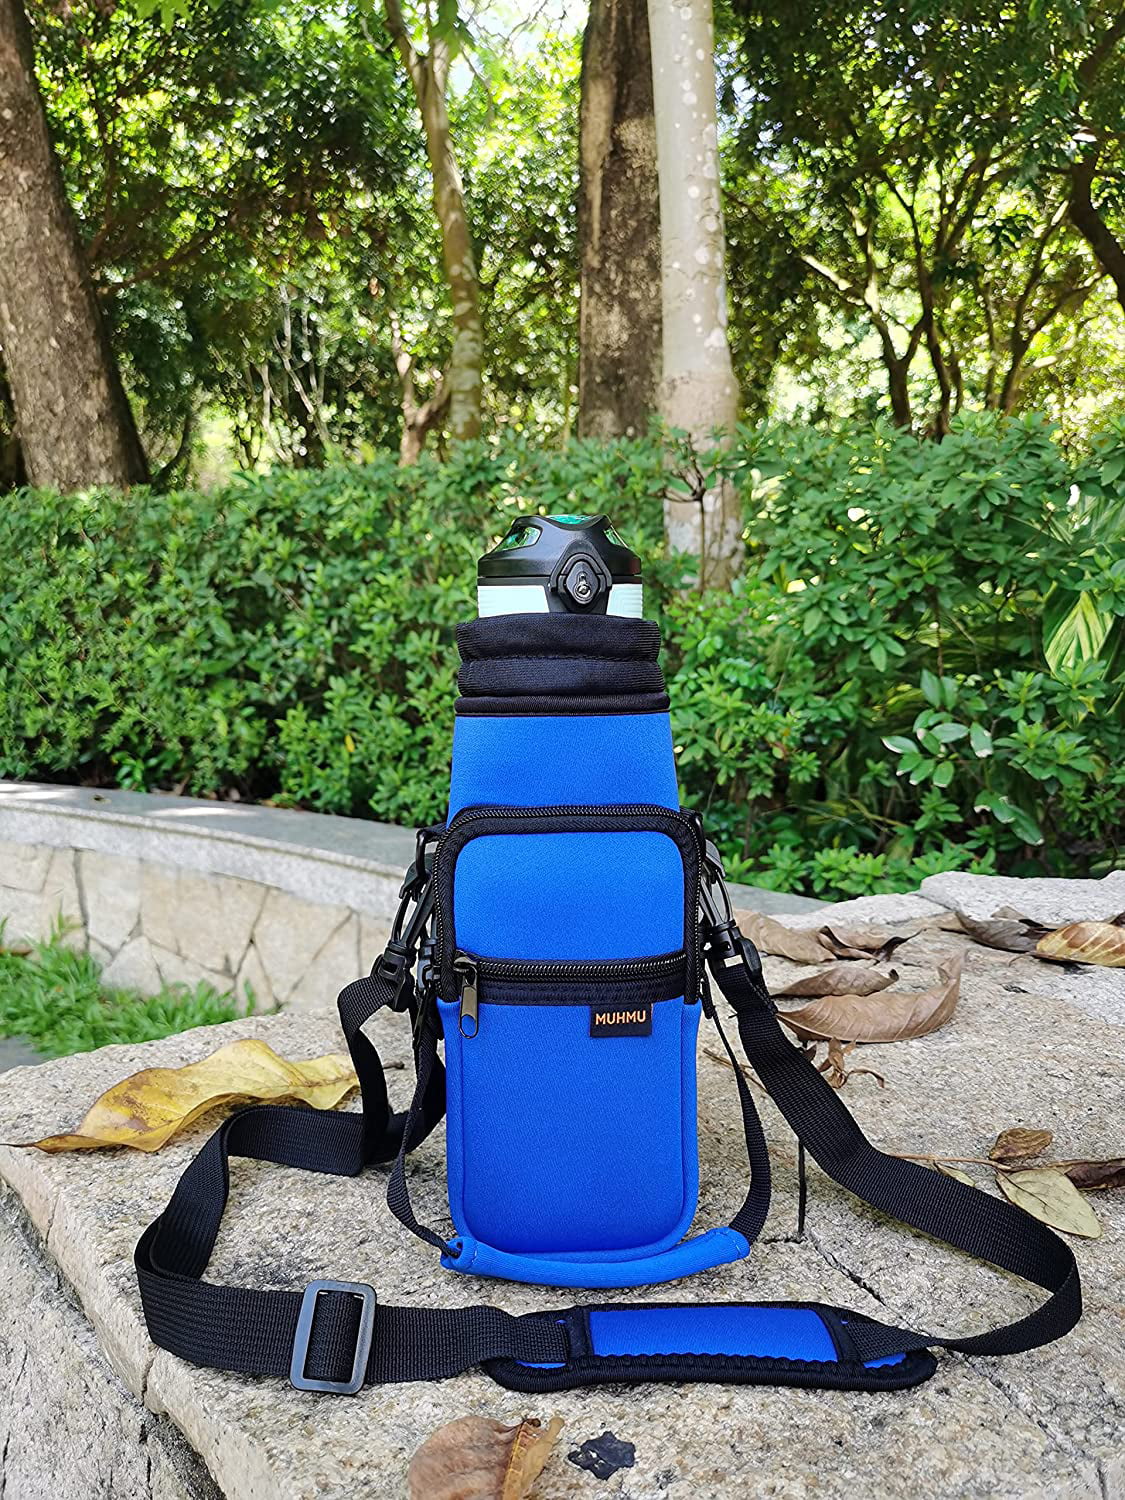 Walking MUHMU Water Bottle Carrier Bag Pouch Holder with Adjustable Shoulder Hand Strap Straw Travelling Camping Neoprene Sleeve Accessories for Hiking 